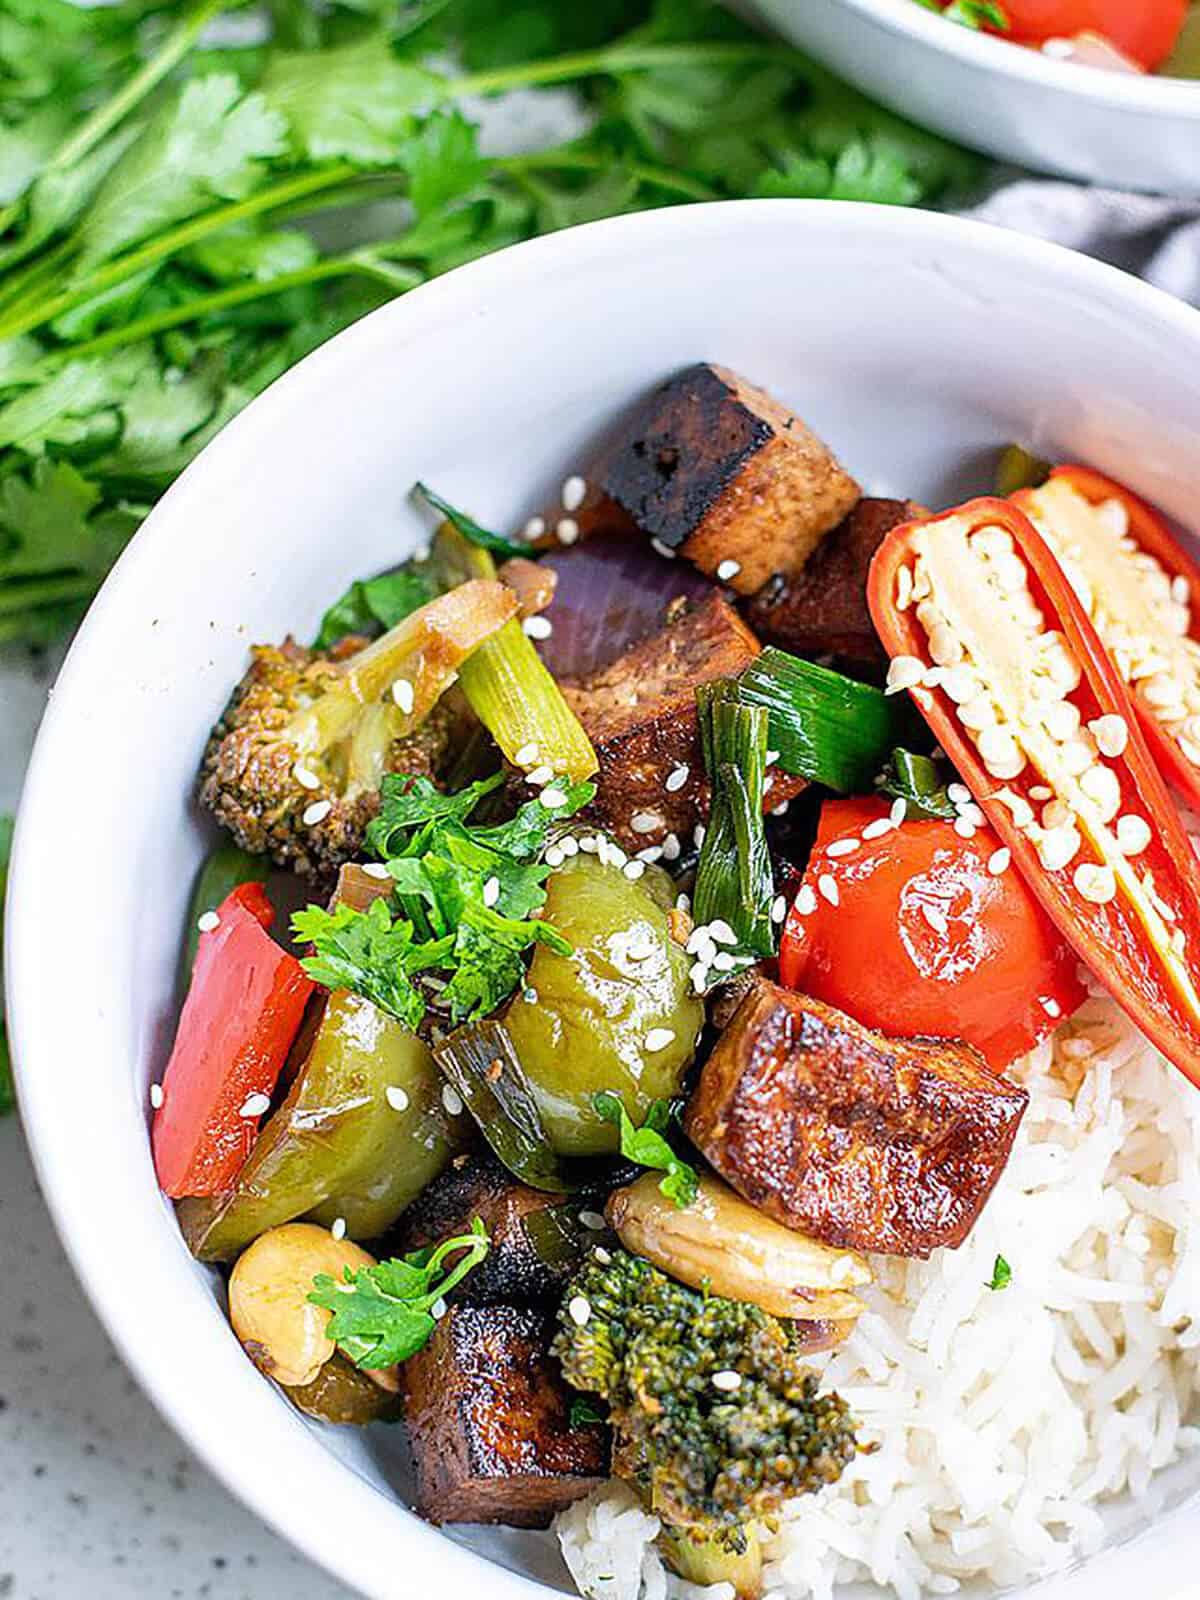 kung pao tofu recipe served in a bowl with steamed rice.